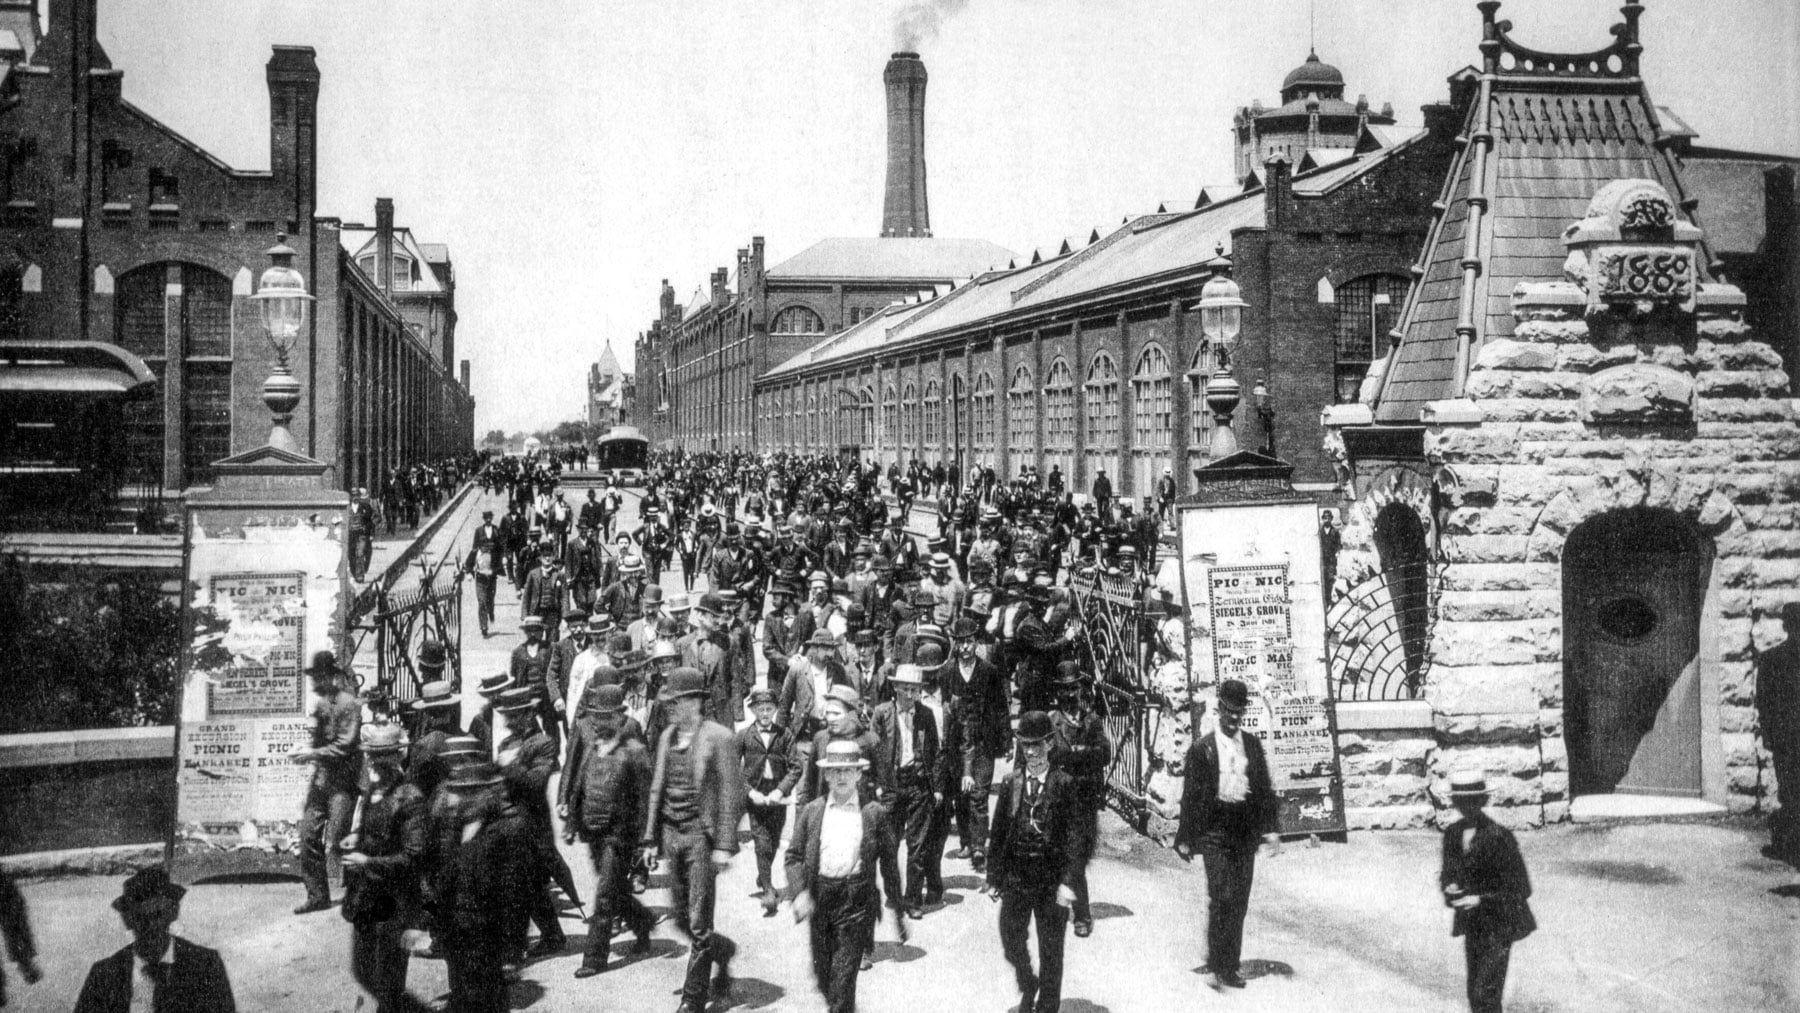 Workers in 1891 leaving through the main gate of the Pullman factory